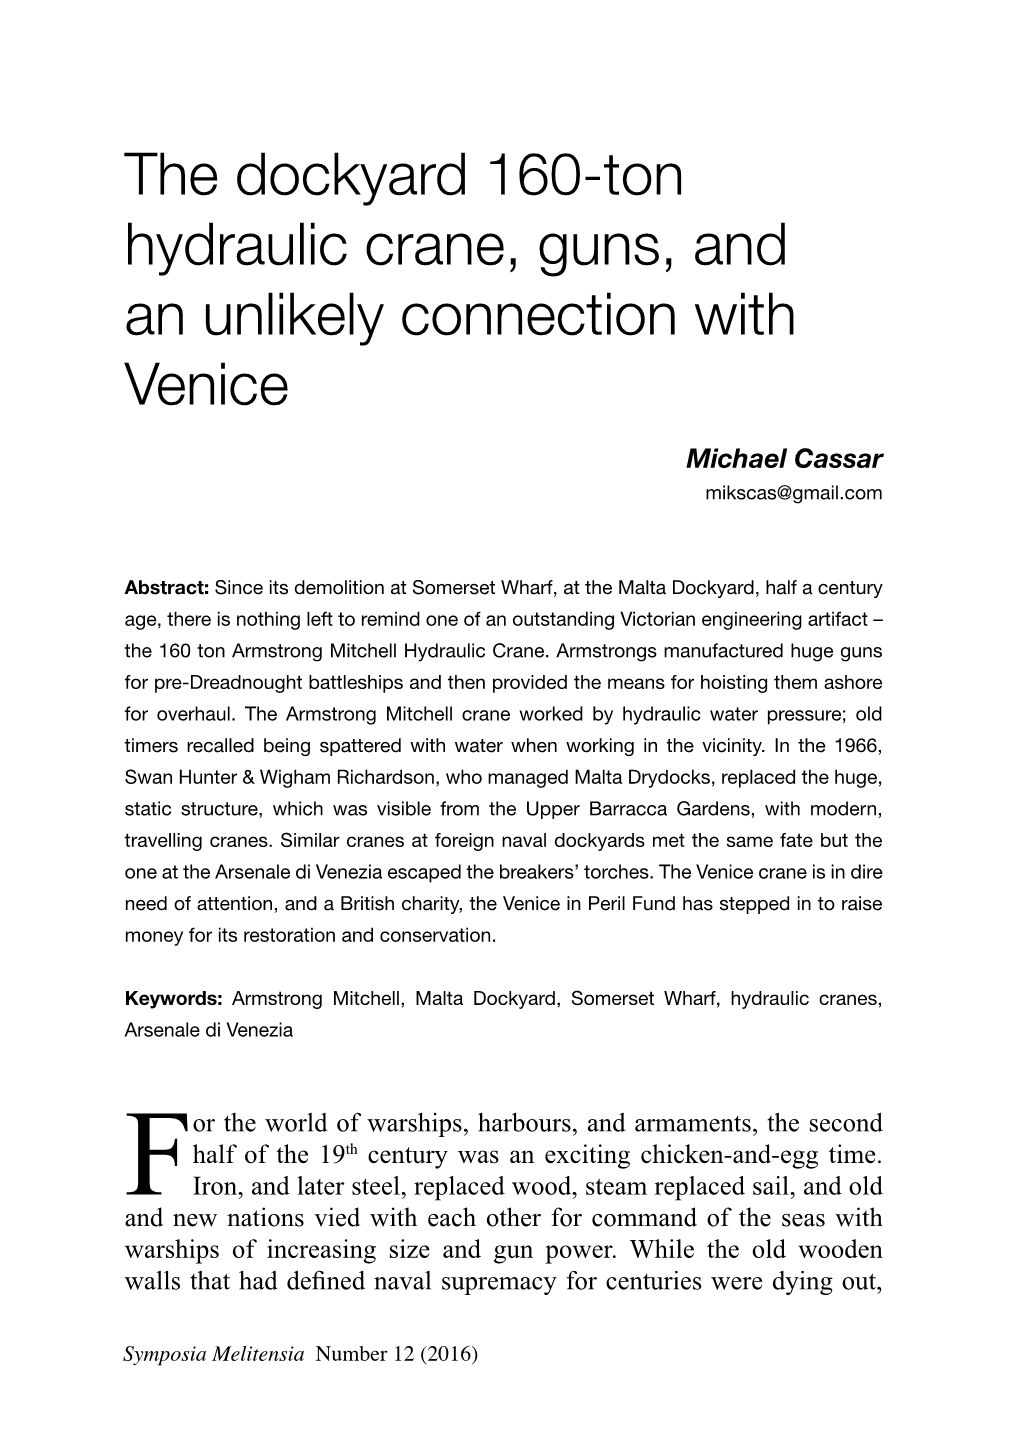 The Dockyard 160-Ton Hydraulic Crane, Guns, and an Unlikely Connection with Venice